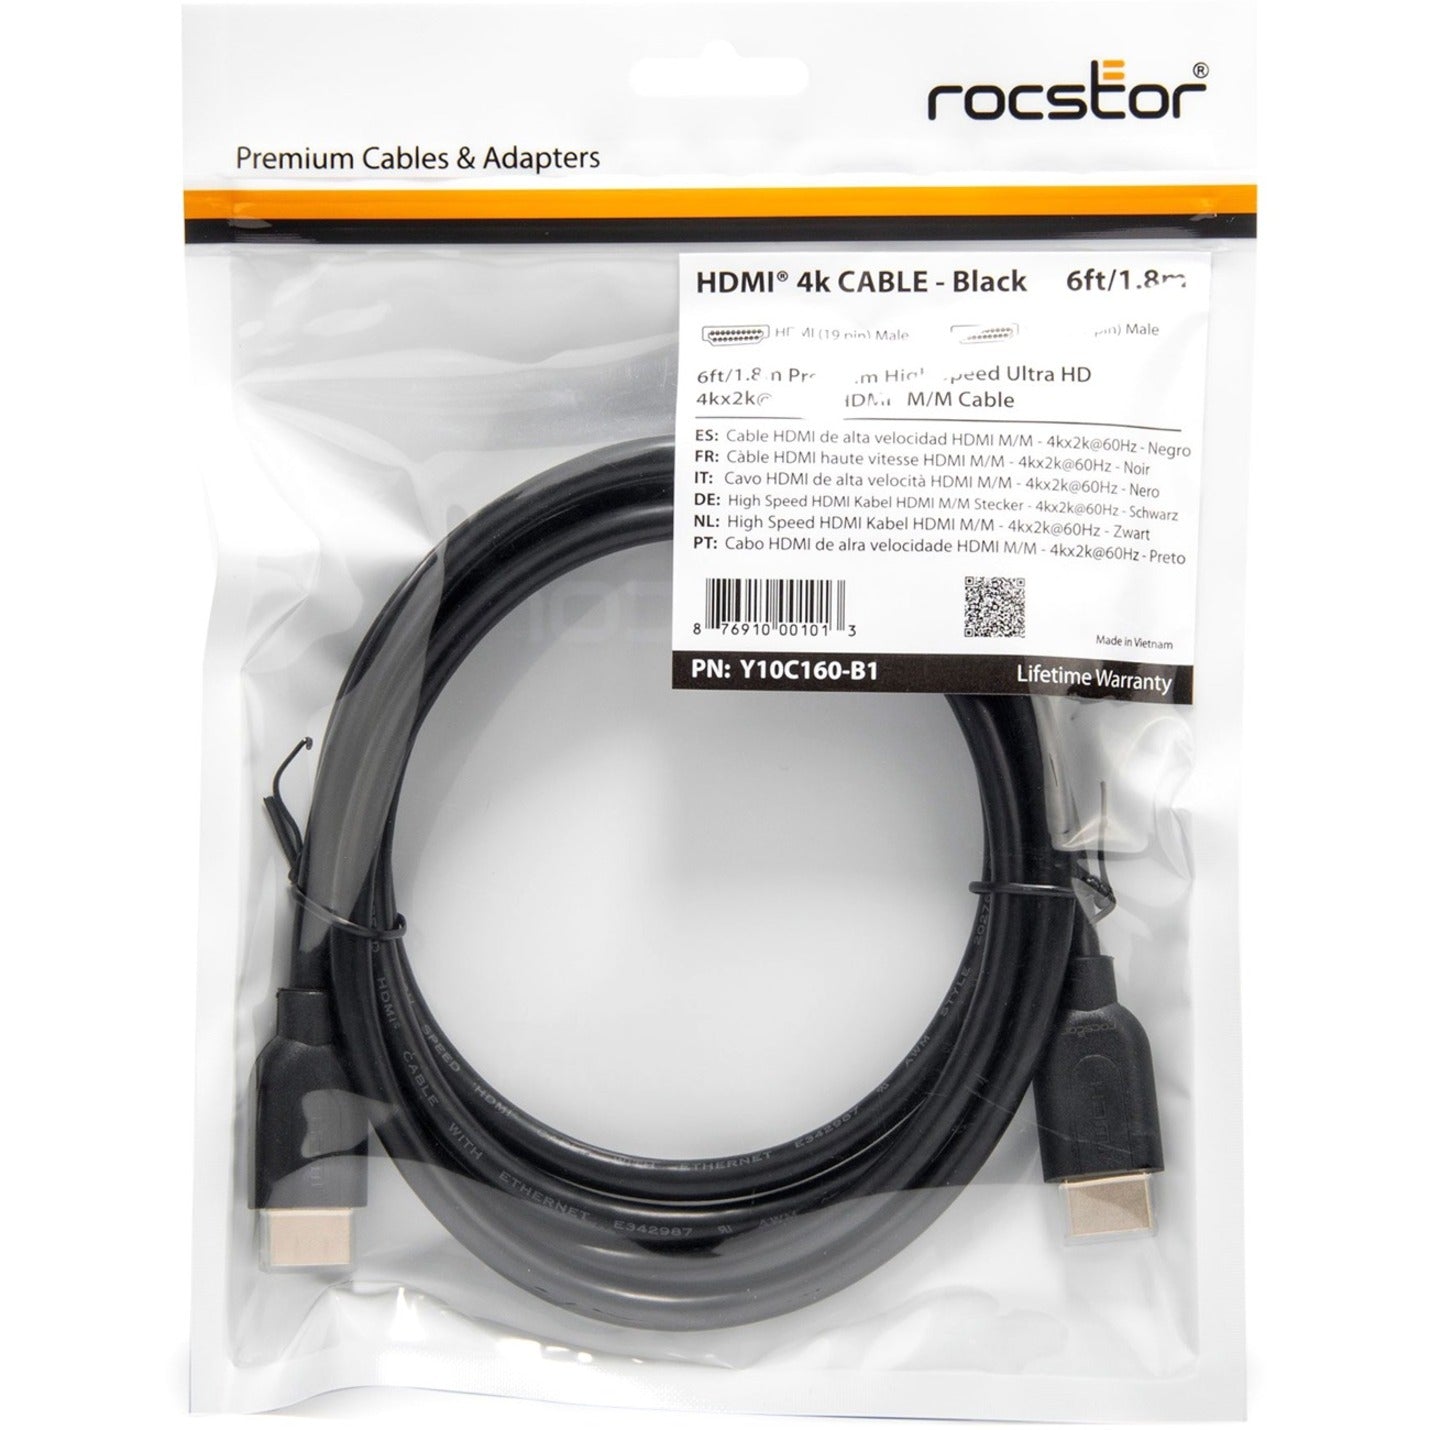 Rocstor Y10C160-B1 HDMI Audio/Video Cable, 6 ft 4K High Speed, Lifetime Warranty